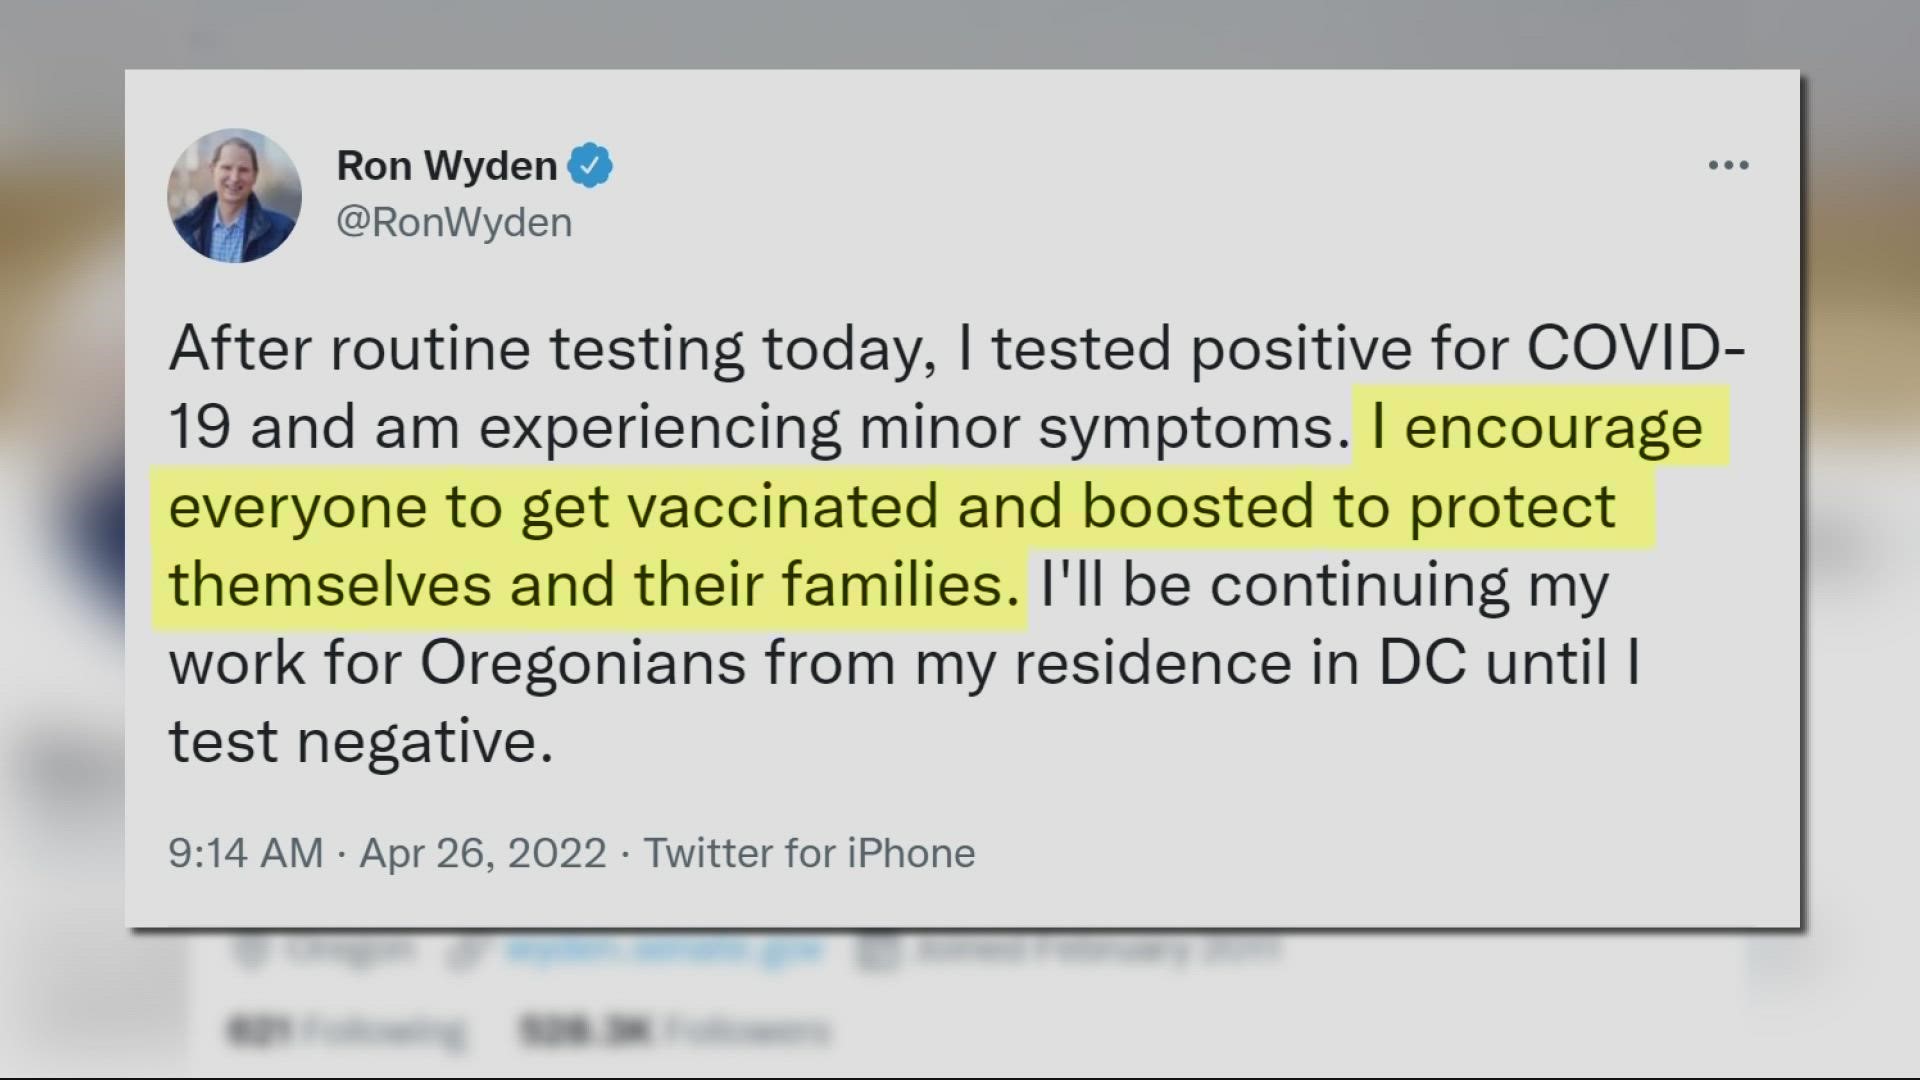 Oregon U.S. Sen. Ron Wyden has tested positive for COVID-19, his office announced April 26.  He is fully vaccinated and experiencing minor symptoms.